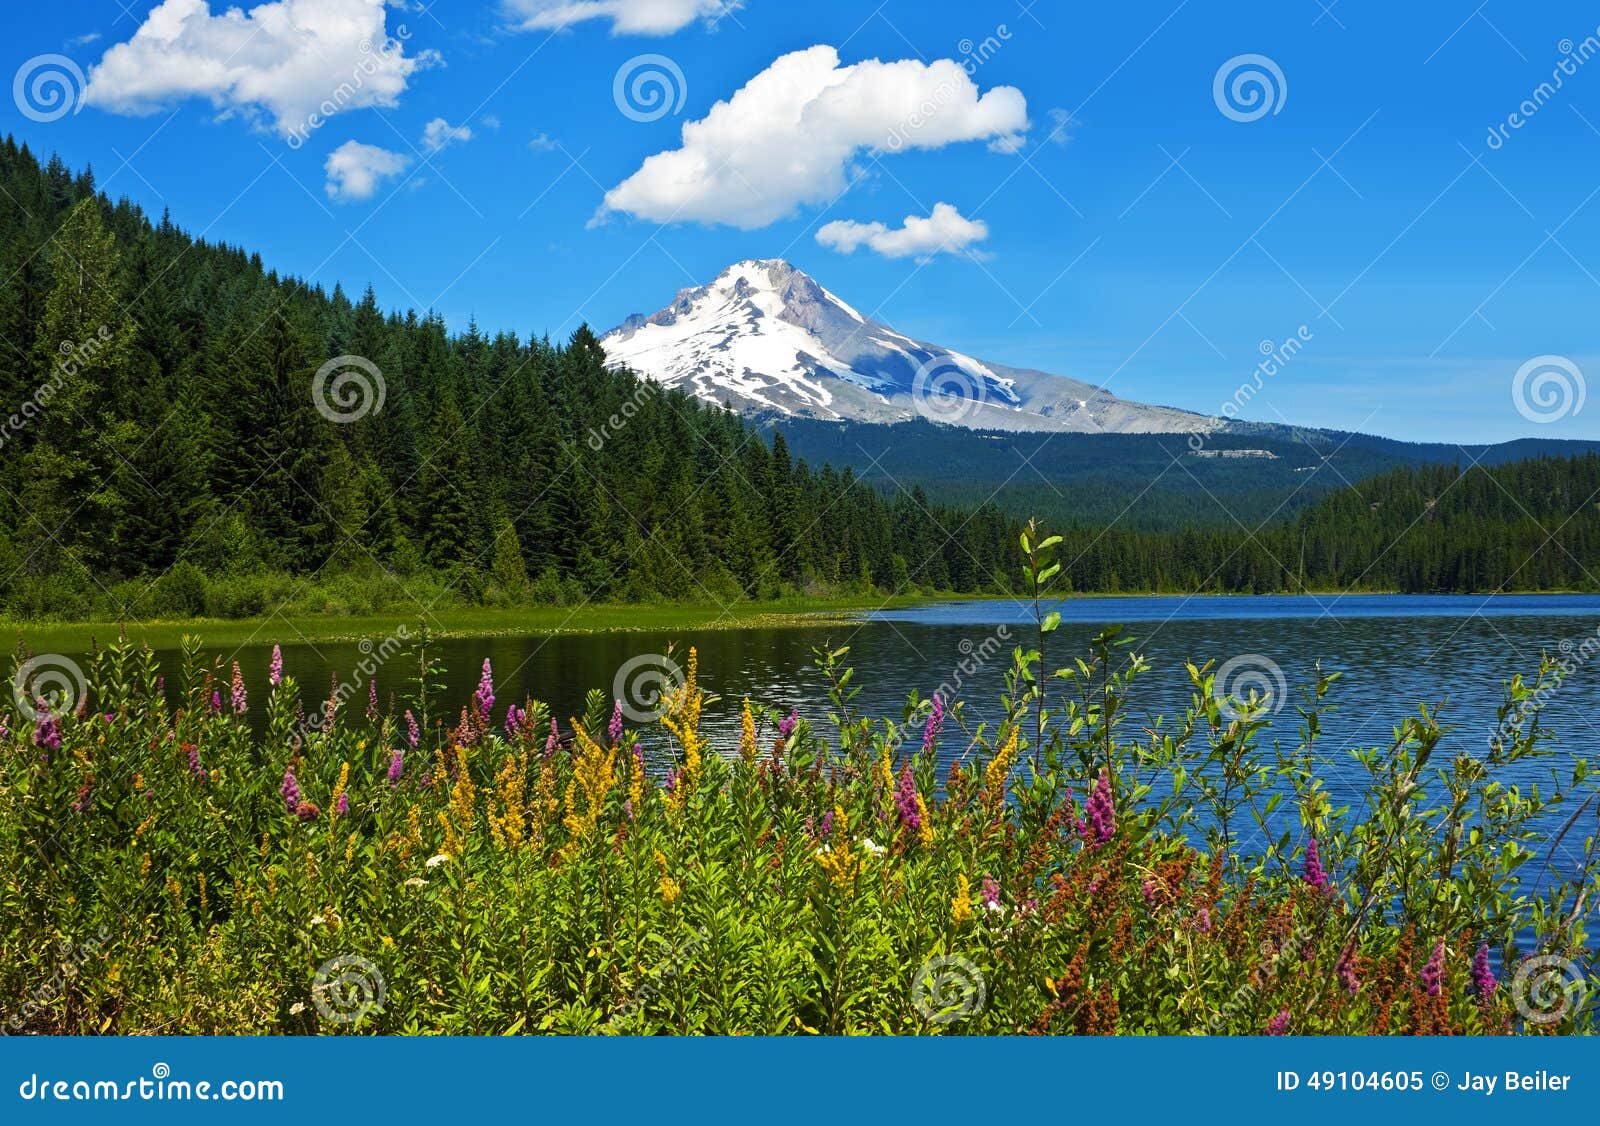 mt. hood with trillium lake and wildflowers